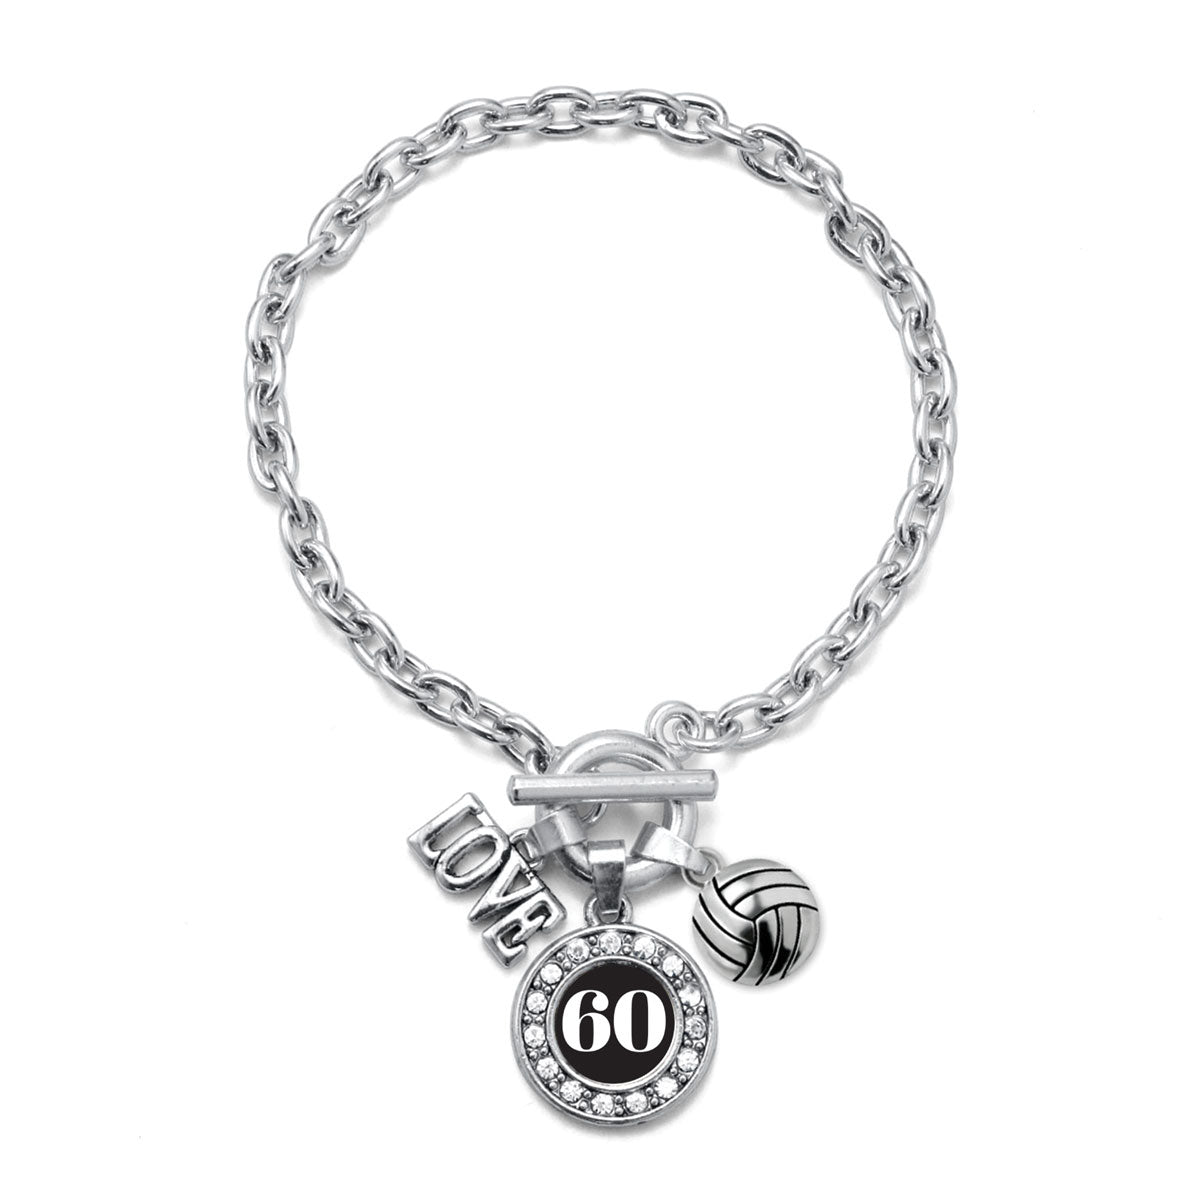 Silver Volleyball - Sports Number 60 Circle Charm Toggle Bracelet